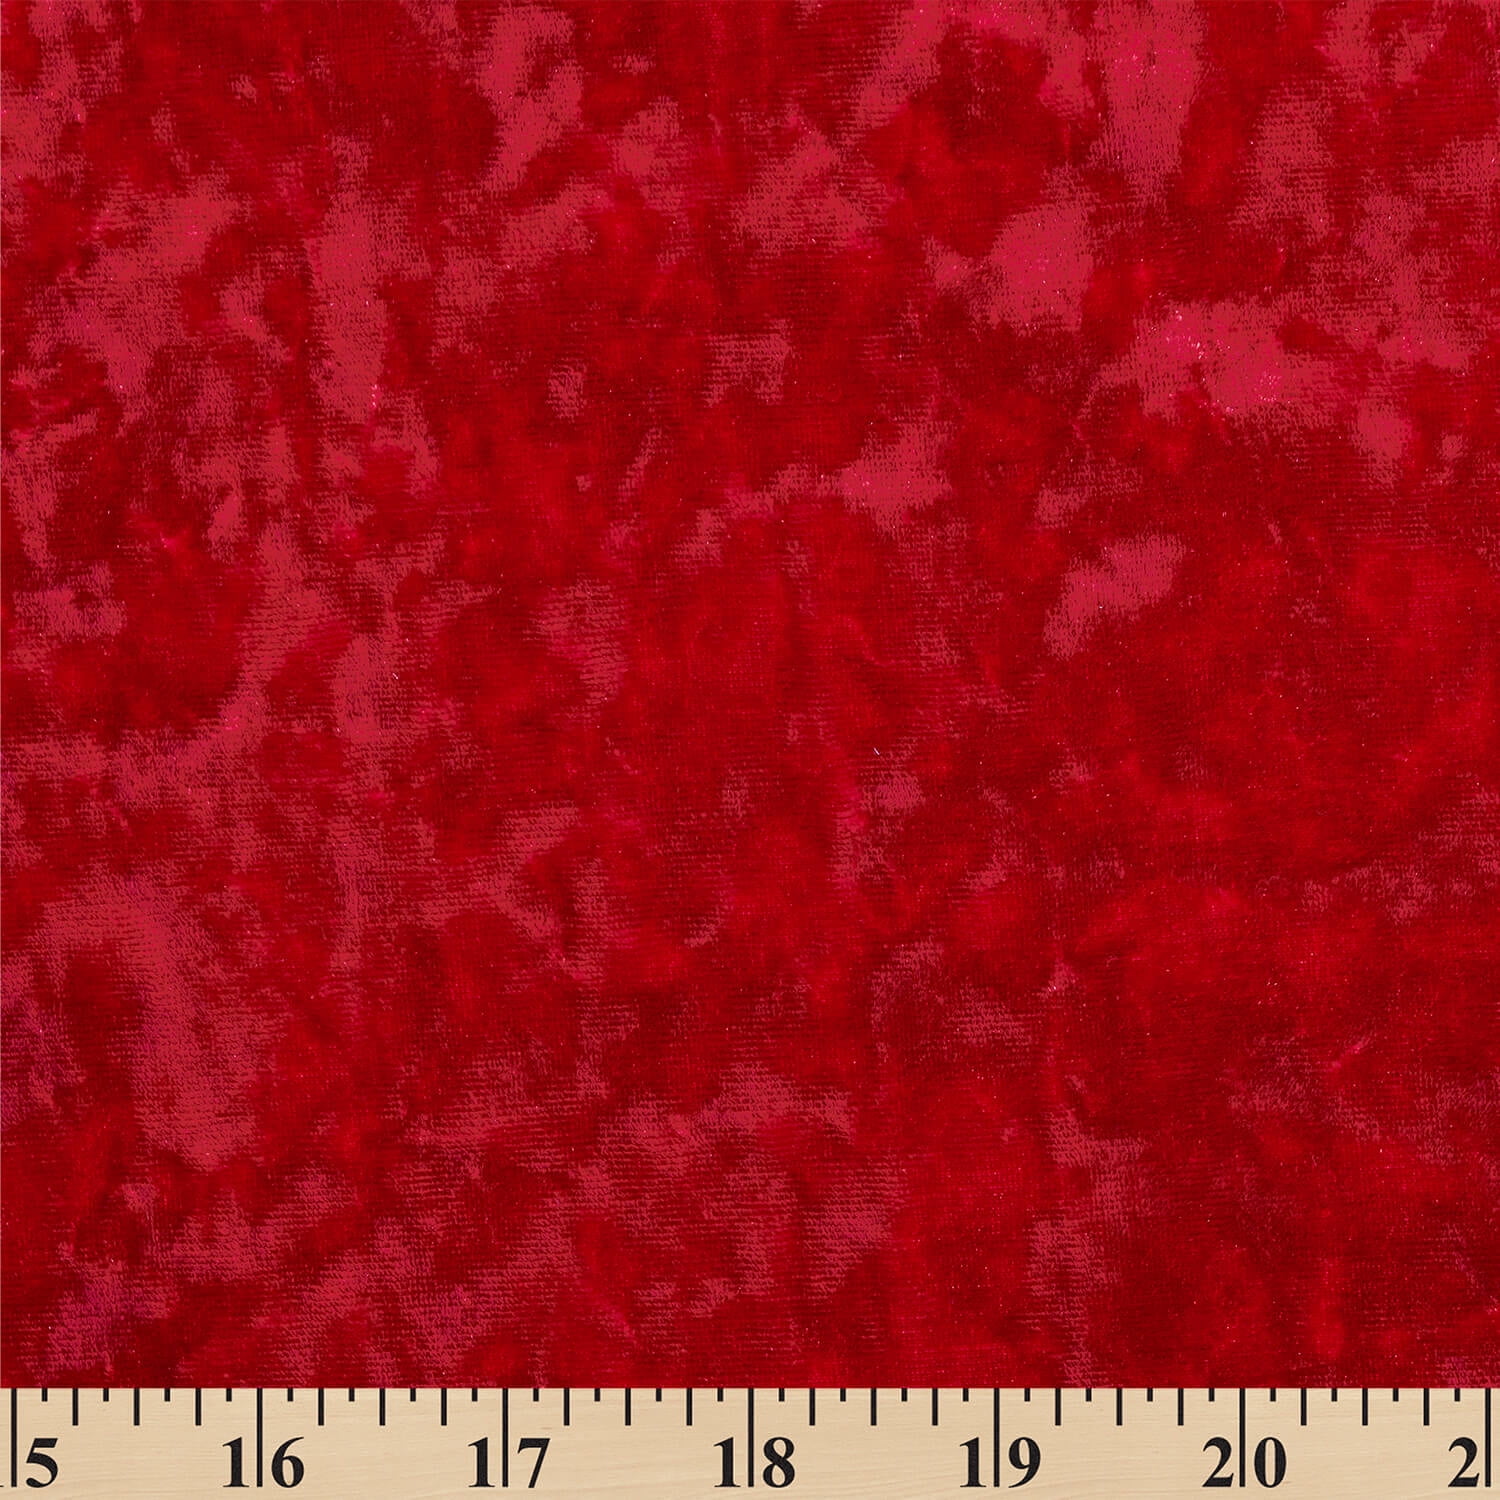 PREMIUM QUALITY Red Crushed Velvet Fabric by The Yard, Red Stretch Fabric  Polyester Spandex for Dresses, Scrunchies, Red Stretch Velour